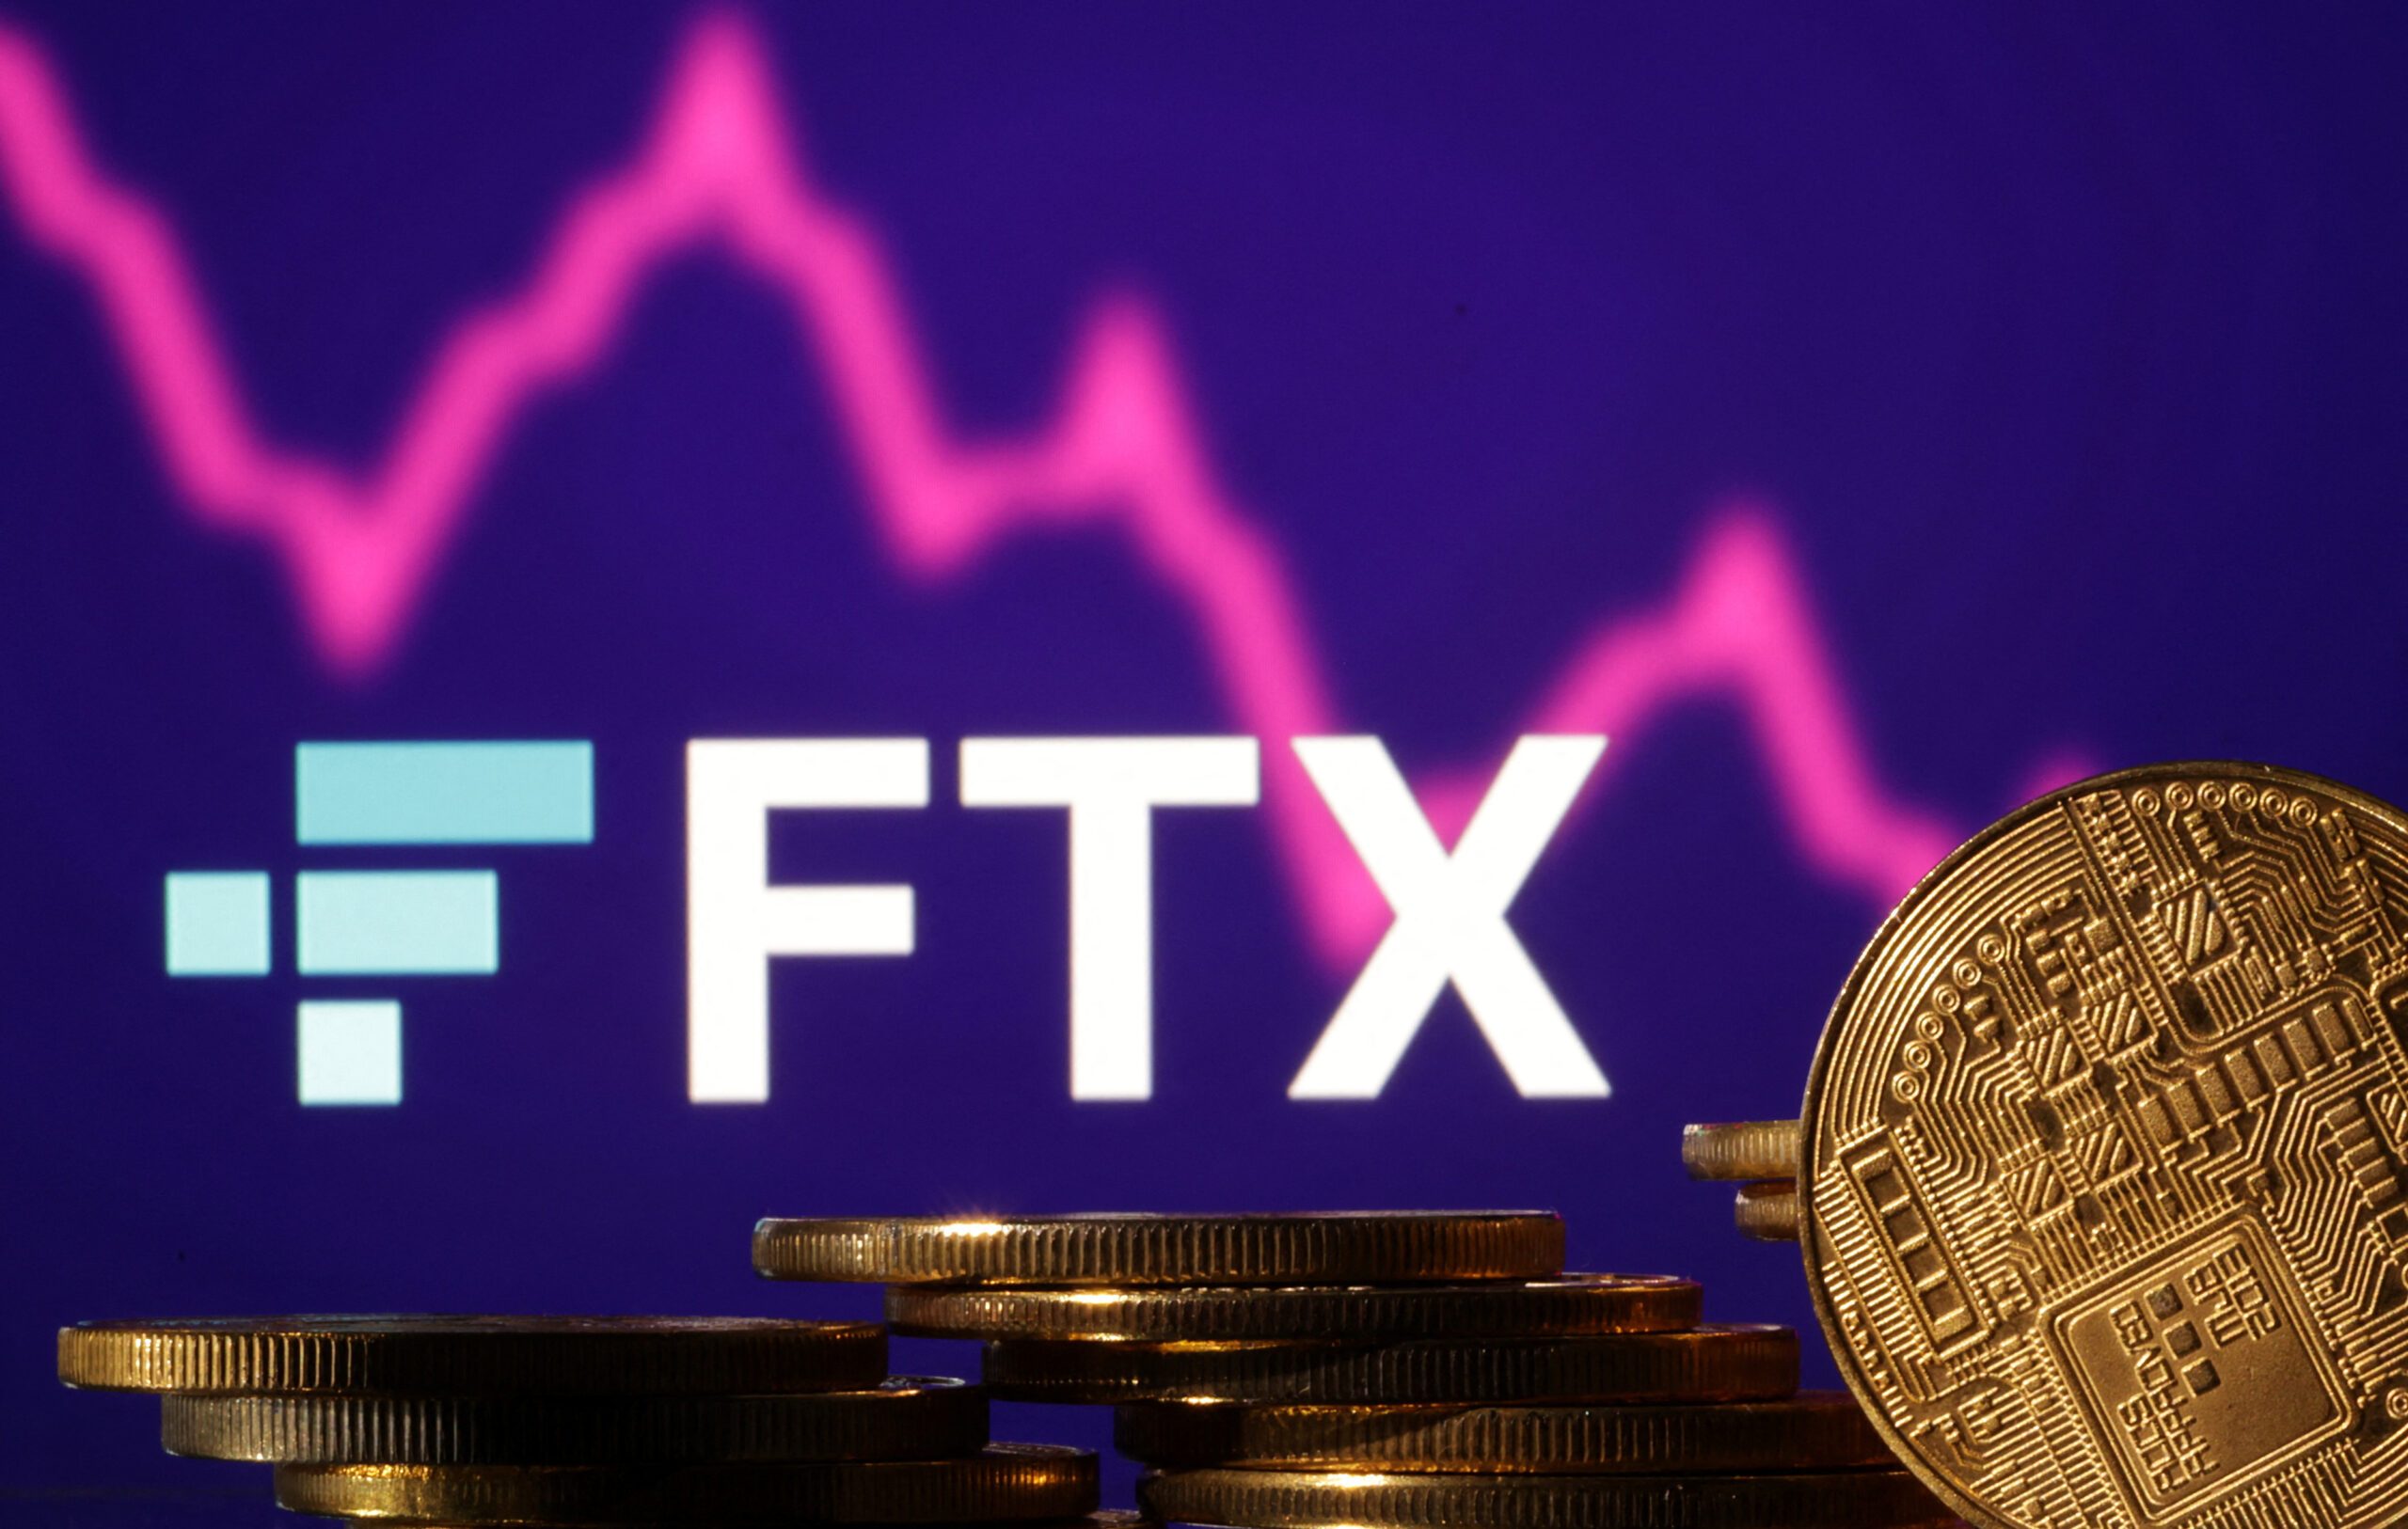 From Binance to Voyager, crypto firms’ exposure to FTX is coming to light